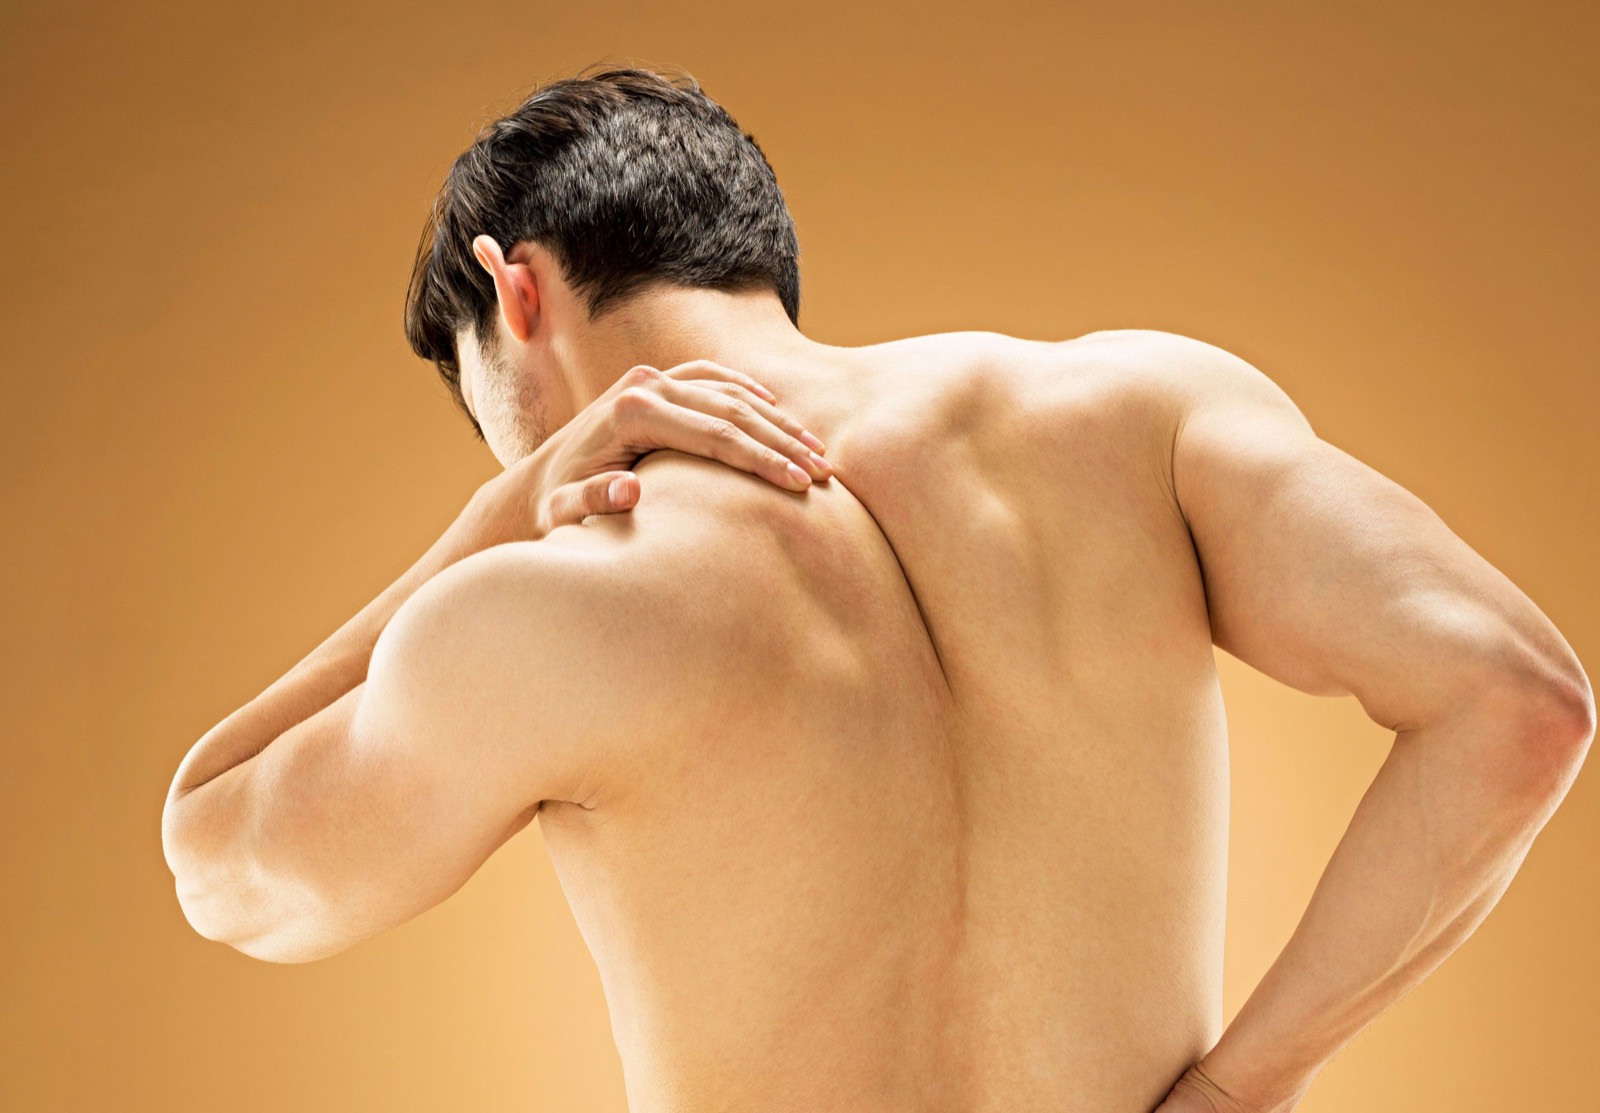 If You Can Get 15/20 on This Quiz on Your First Try, You Definitely Know a Lot About the Human Body shoulder blade